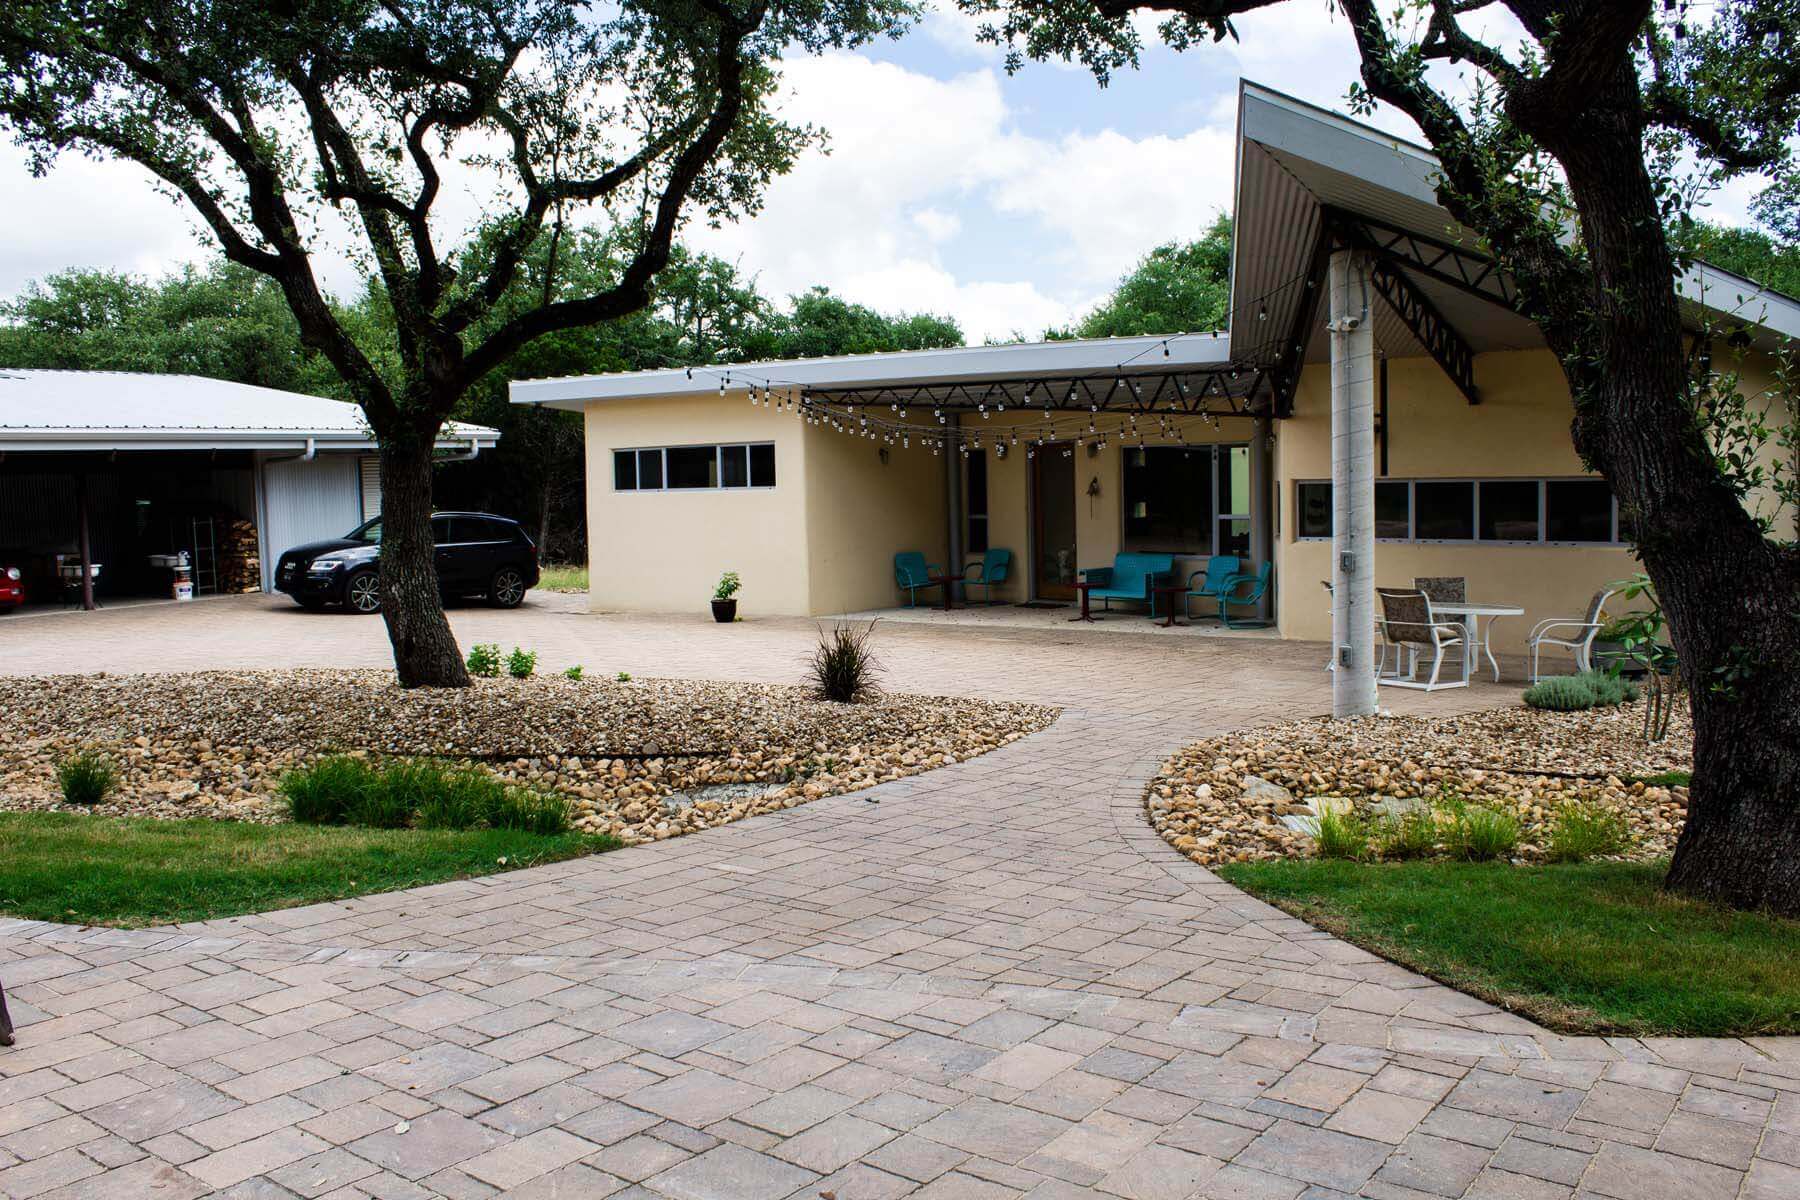 paver stone driveway hardscape solution in Austin Texas